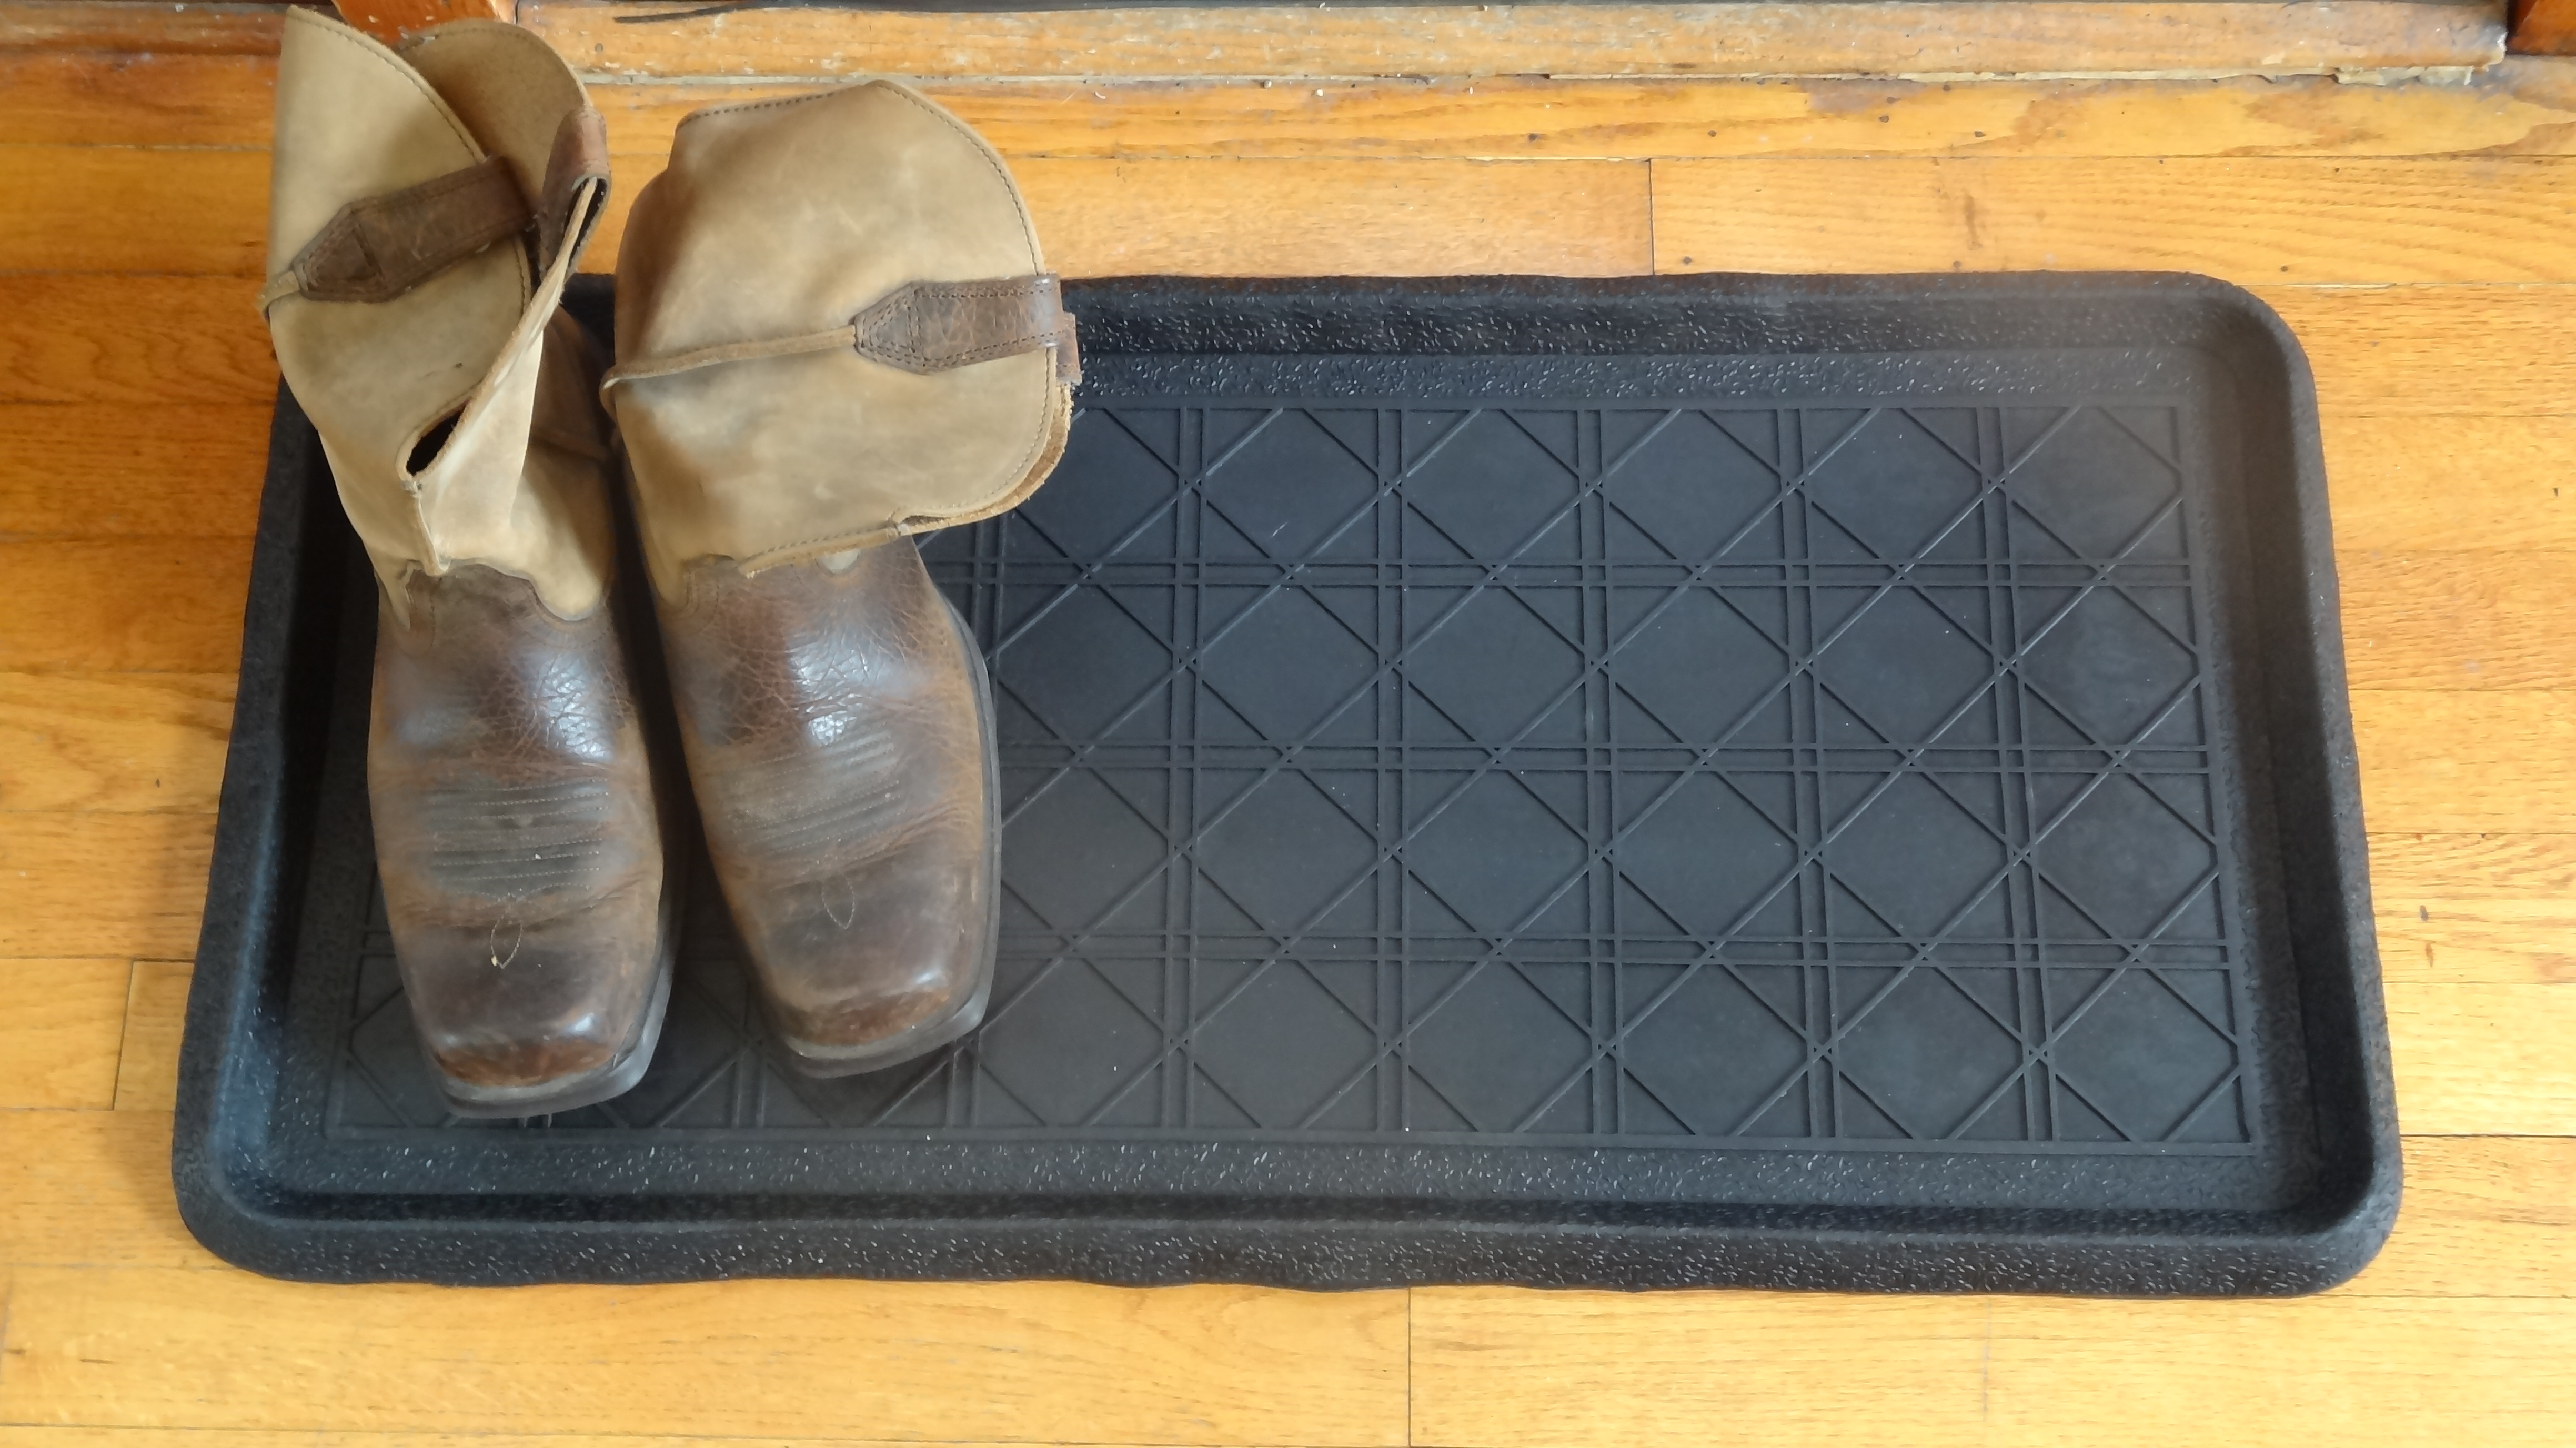 https://www.everythingdoormats.com/images/products/Canning-embossed-rubber-boot-tray-36-16-1-with-boots.jpg